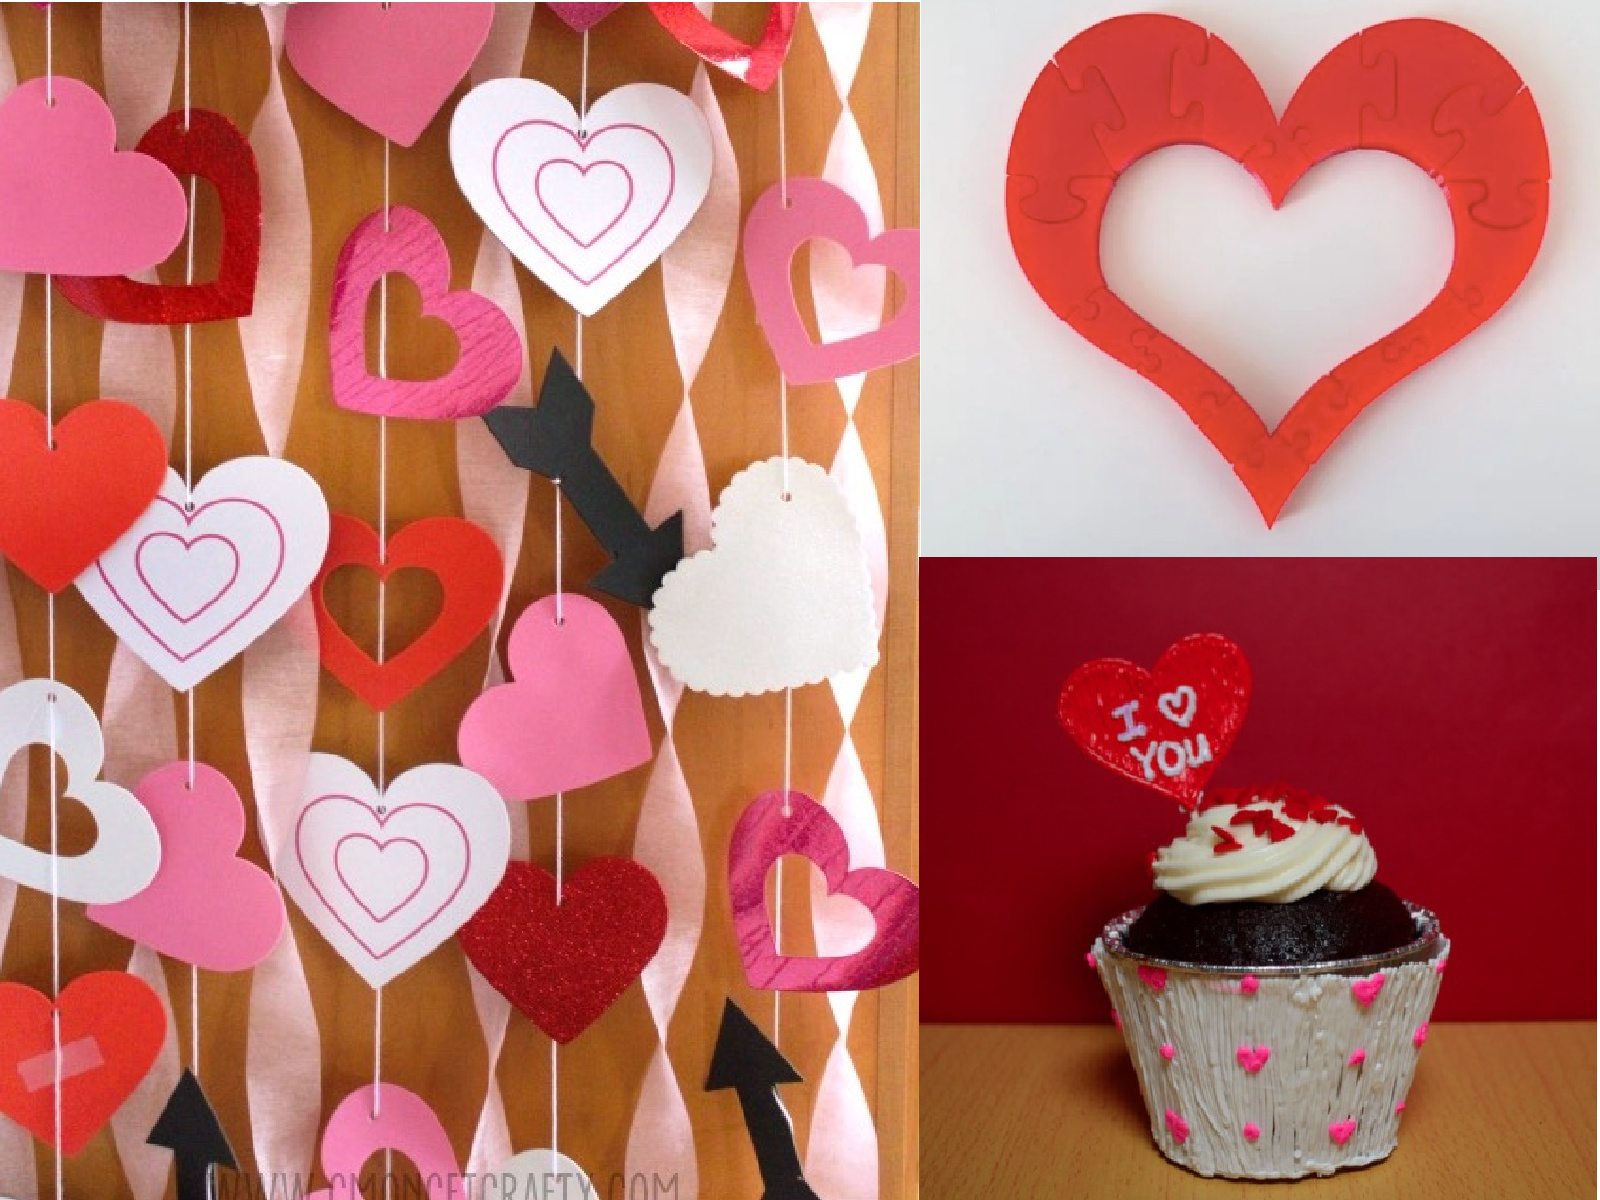 + ways kids can celebrate a virtual Valentine's Day using tech